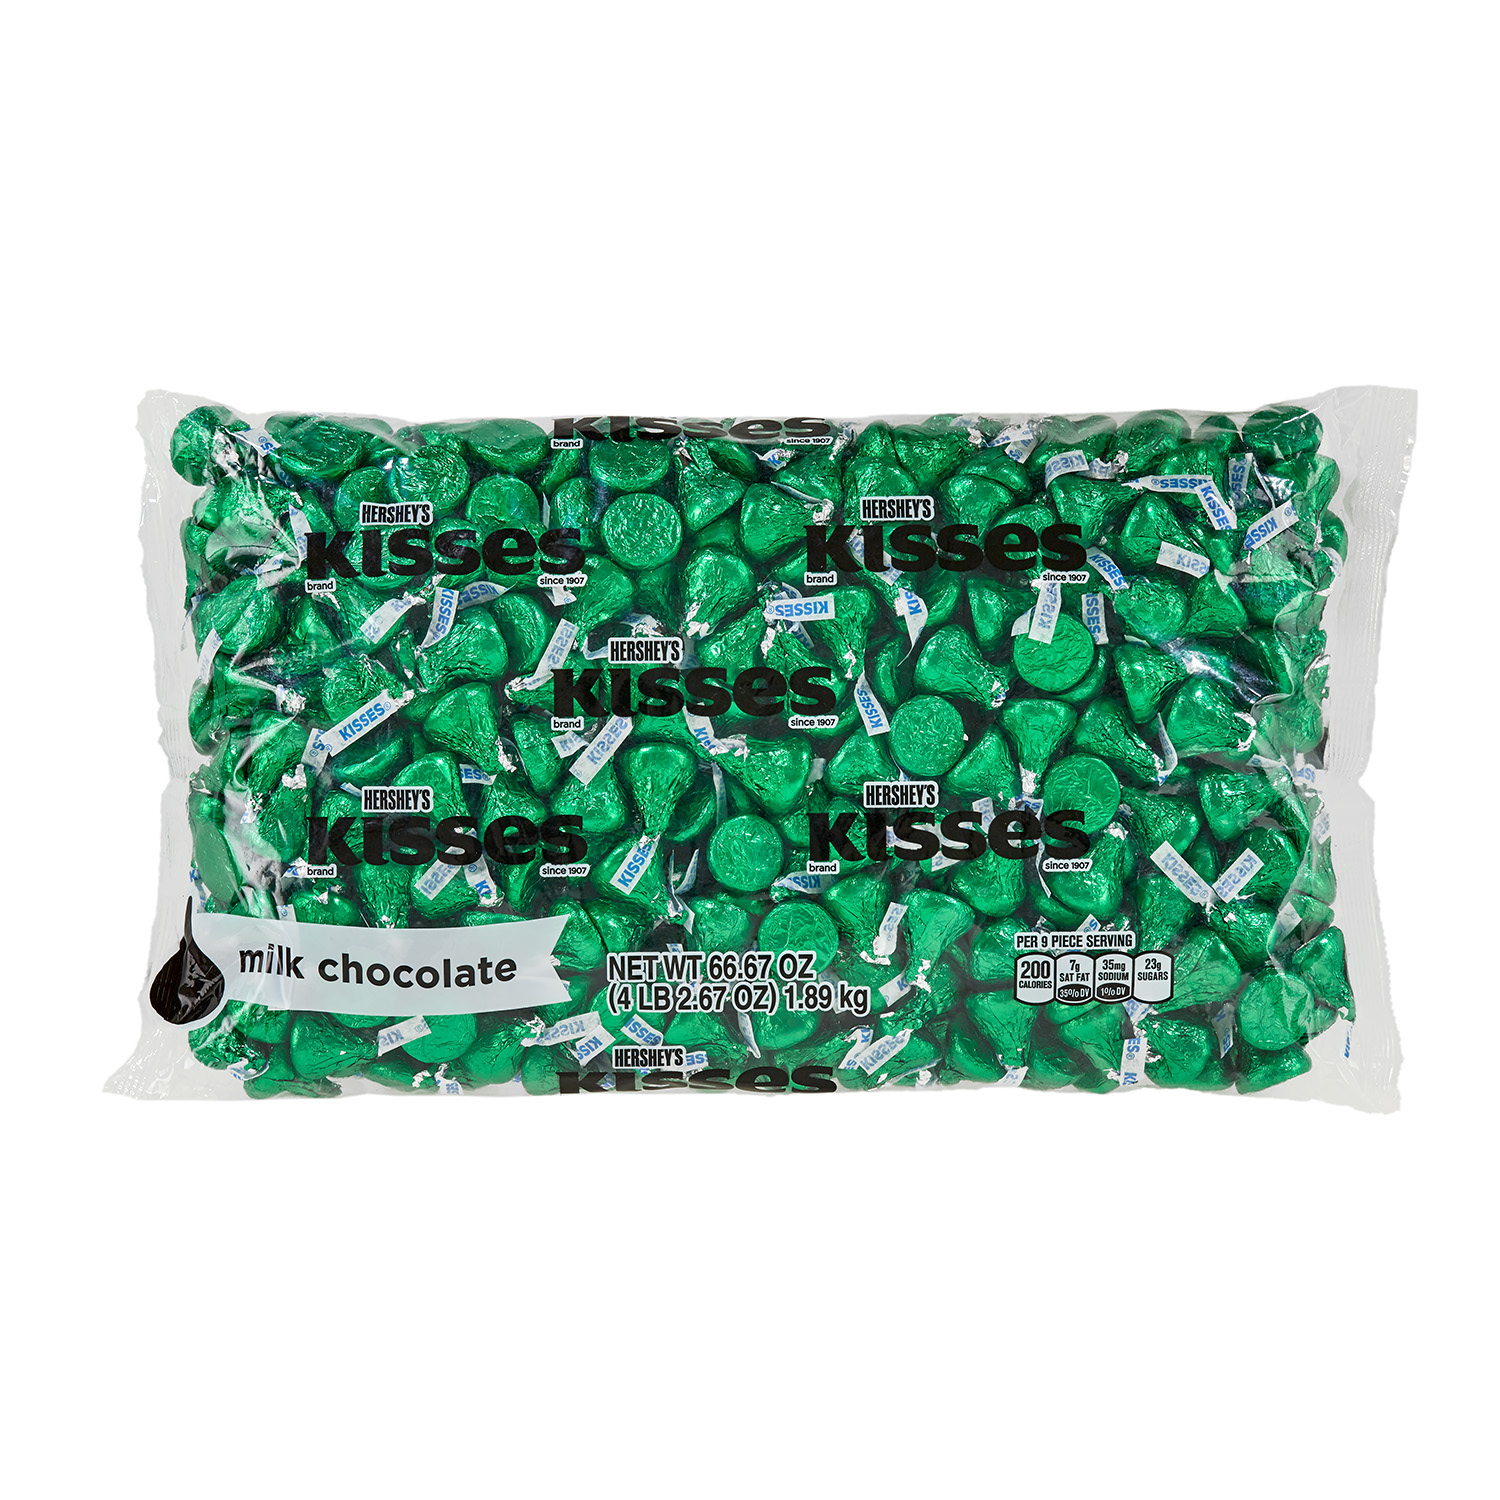 Kisses, Milk Chocolate Candy, Green Foil, 66.7 Oz - Online Only